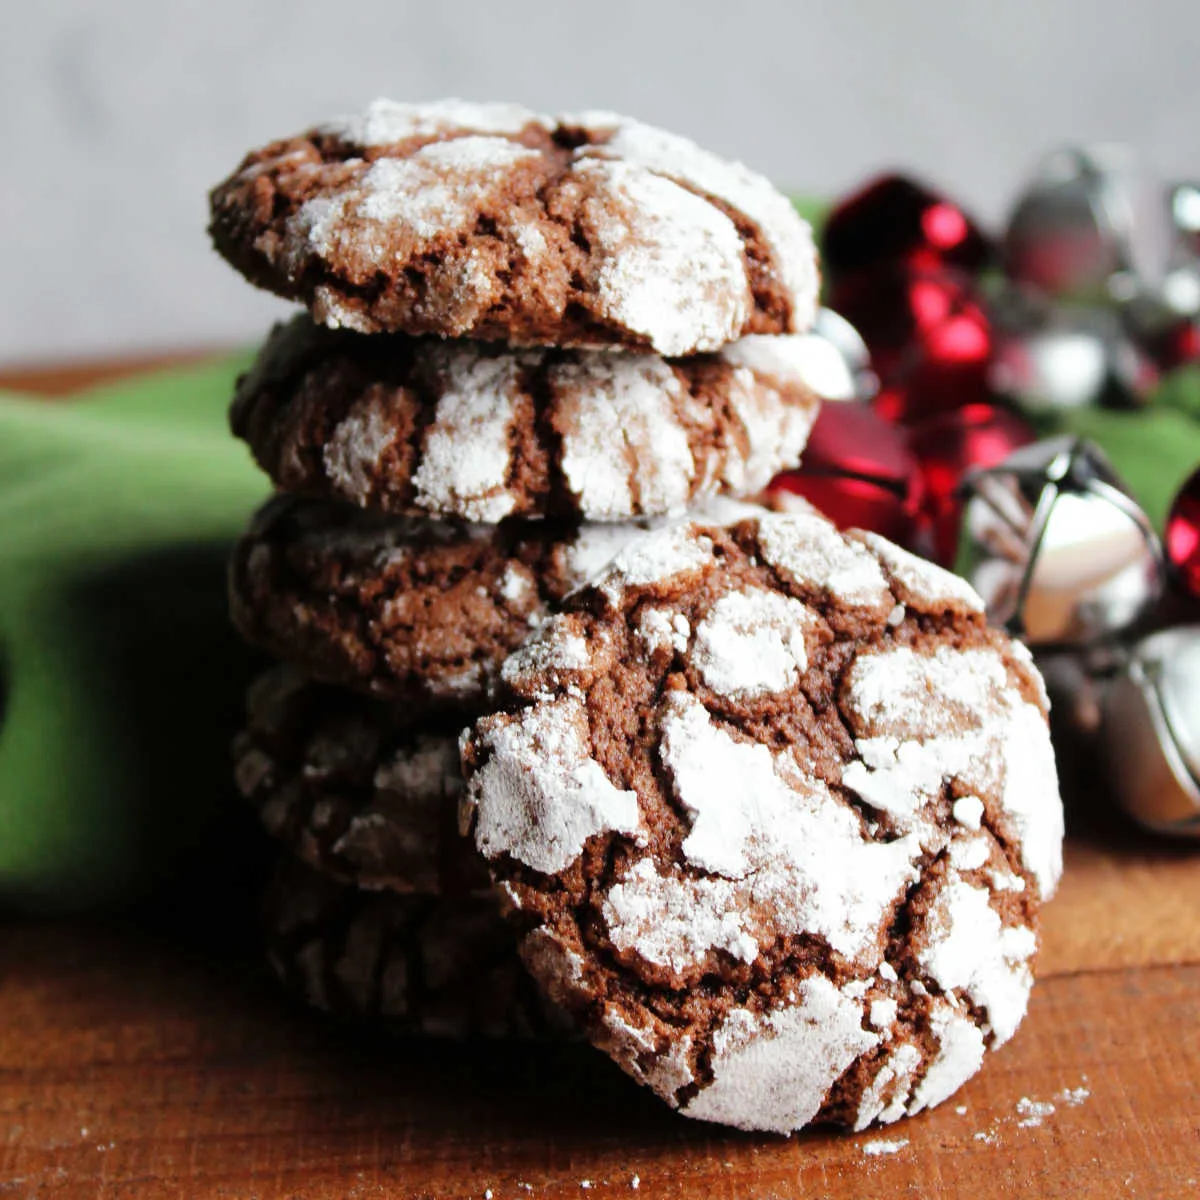 Stack of chocolate crinkles cookies with bits of the chocolate interior showing through the crackled powdered sugar exterior.